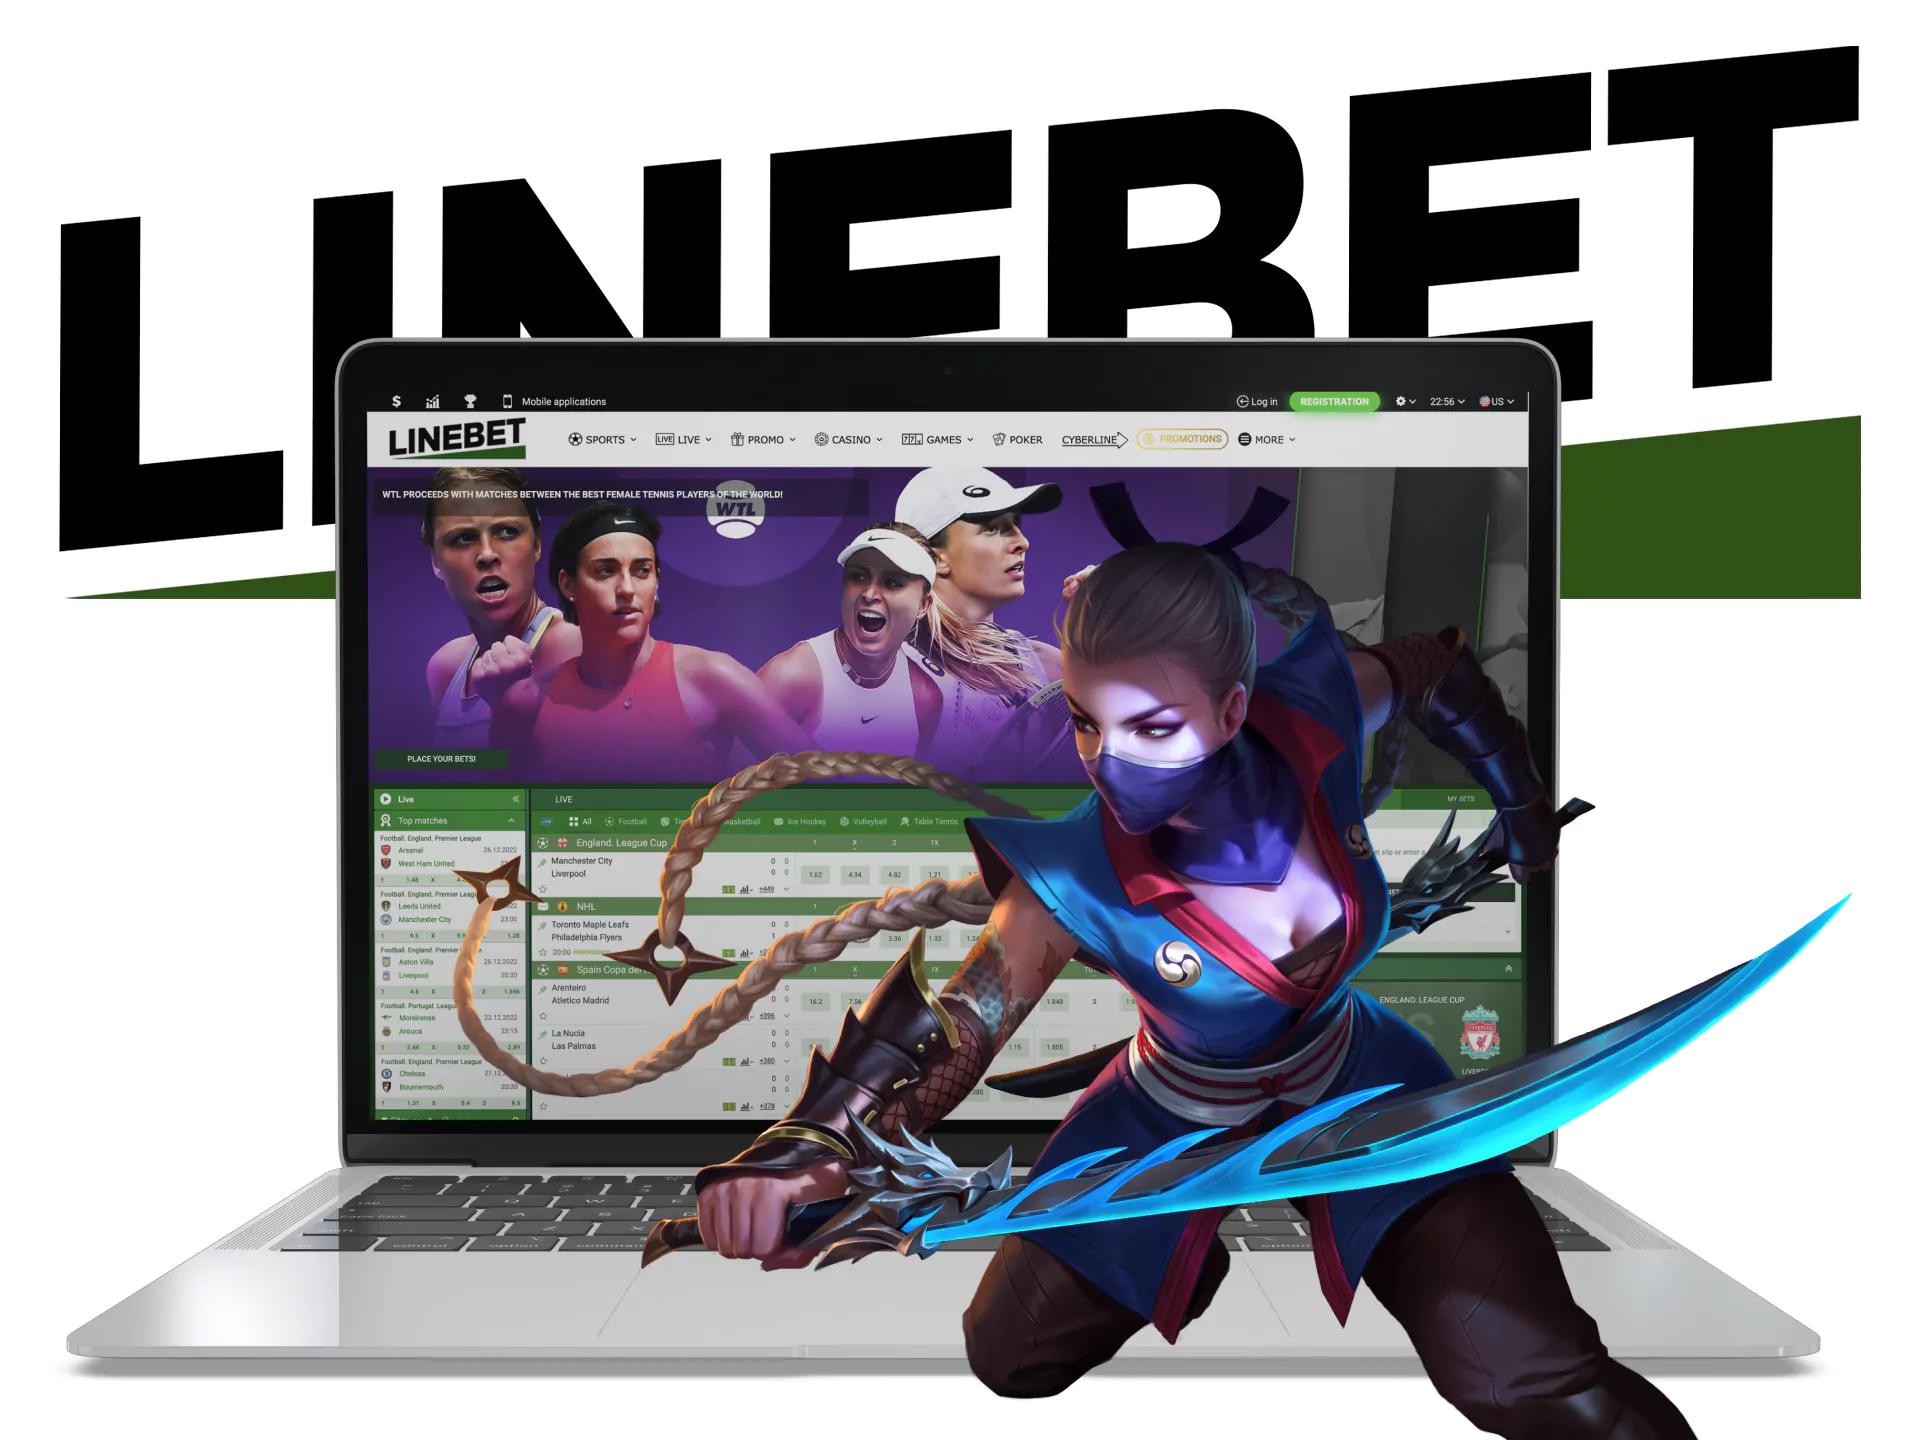 Learn with this guide how to start playing esports on Linebet.